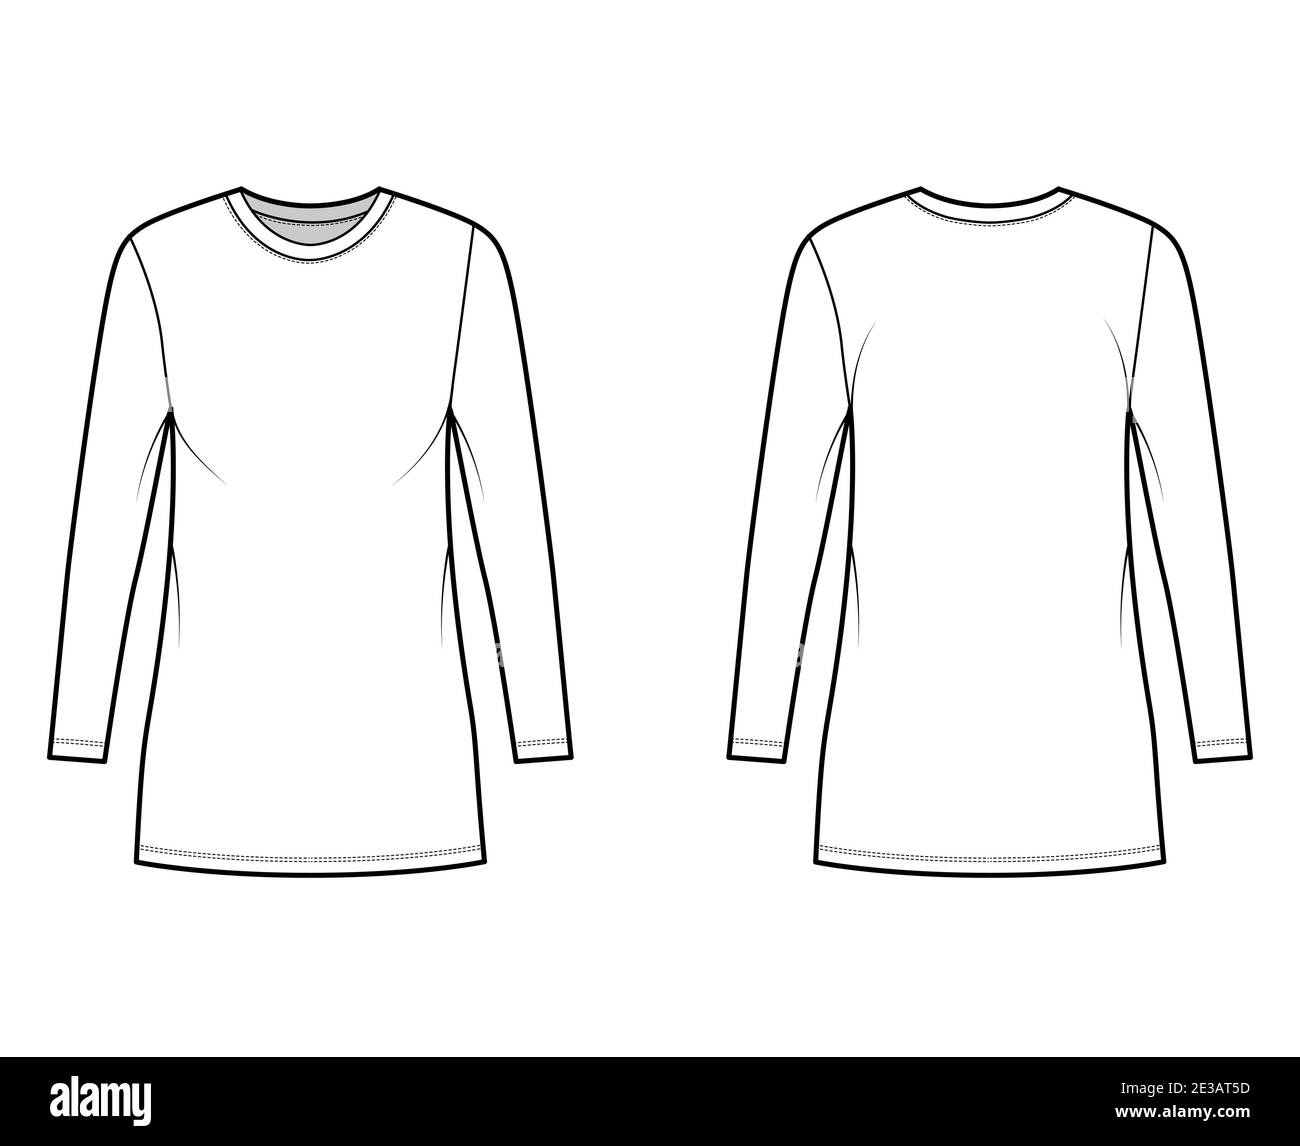 T-shirt dress technical fashion illustration with crew neck, long sleeves, mini length, oversized, Pencil fullness. Flat apparel template front, back, white color. Women, men, unisex CAD mockup Stock Vector